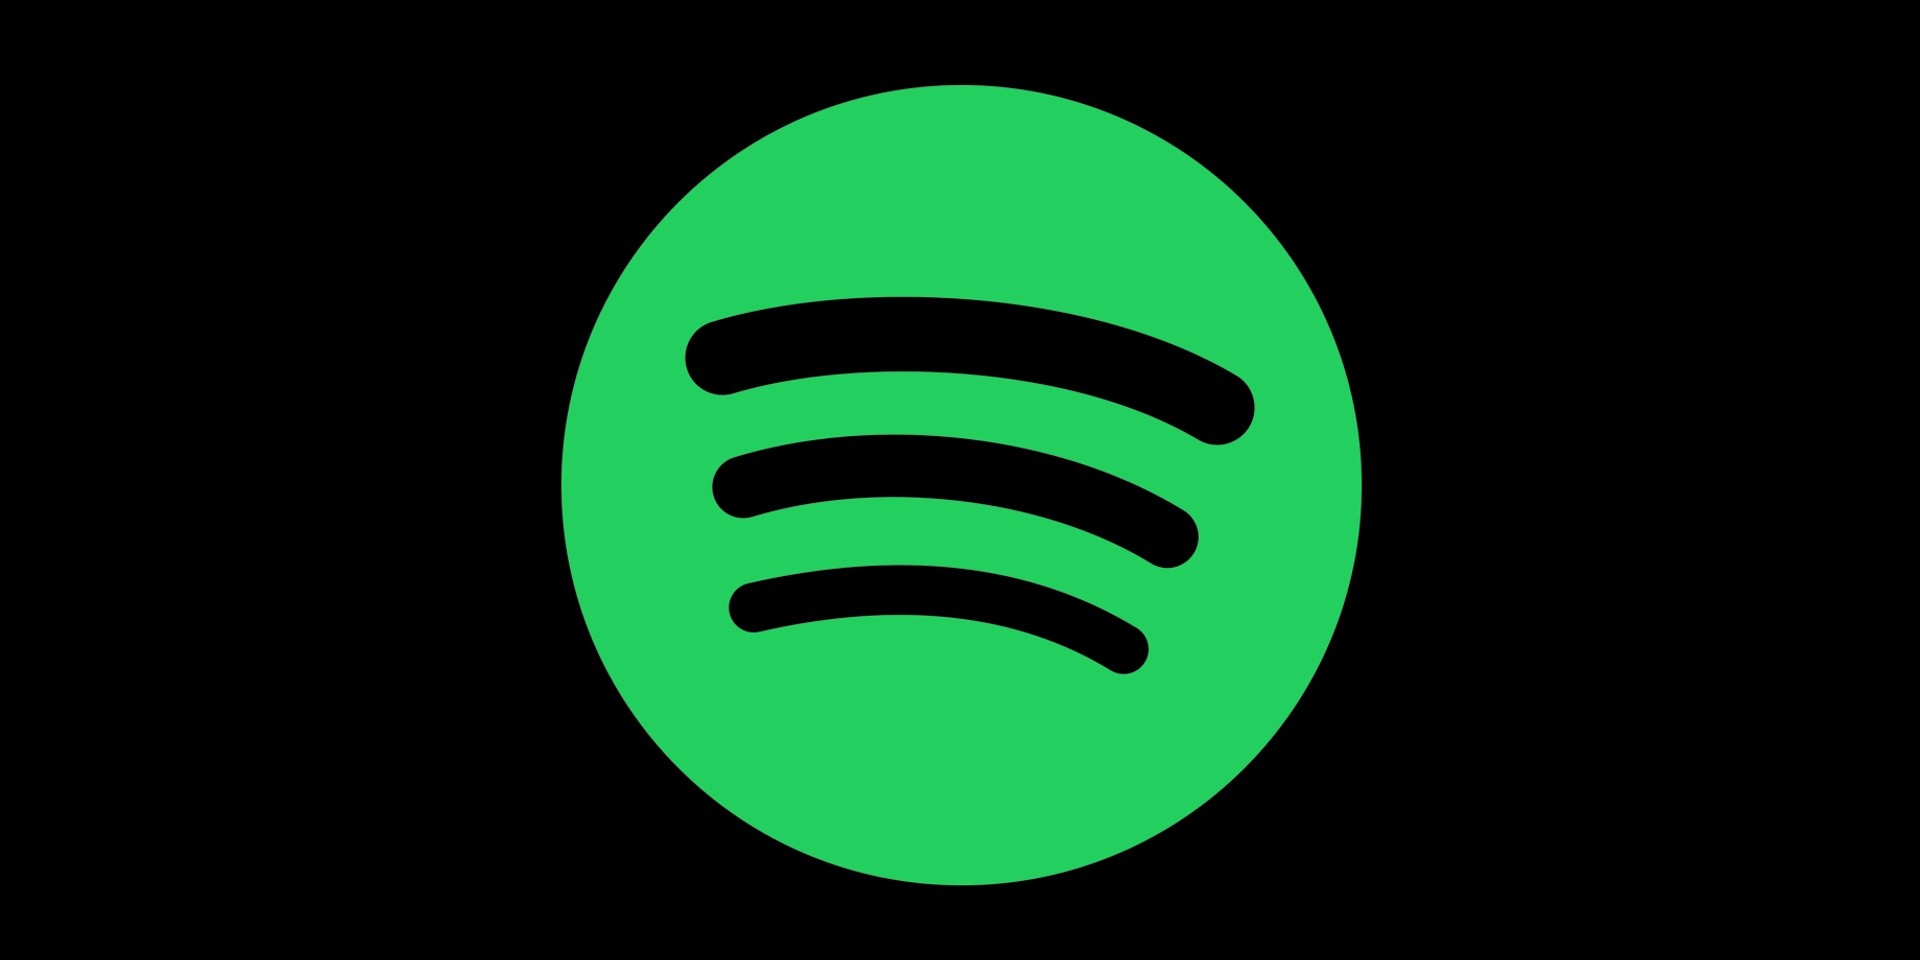 Artists can no longer upload music directly to Spotify